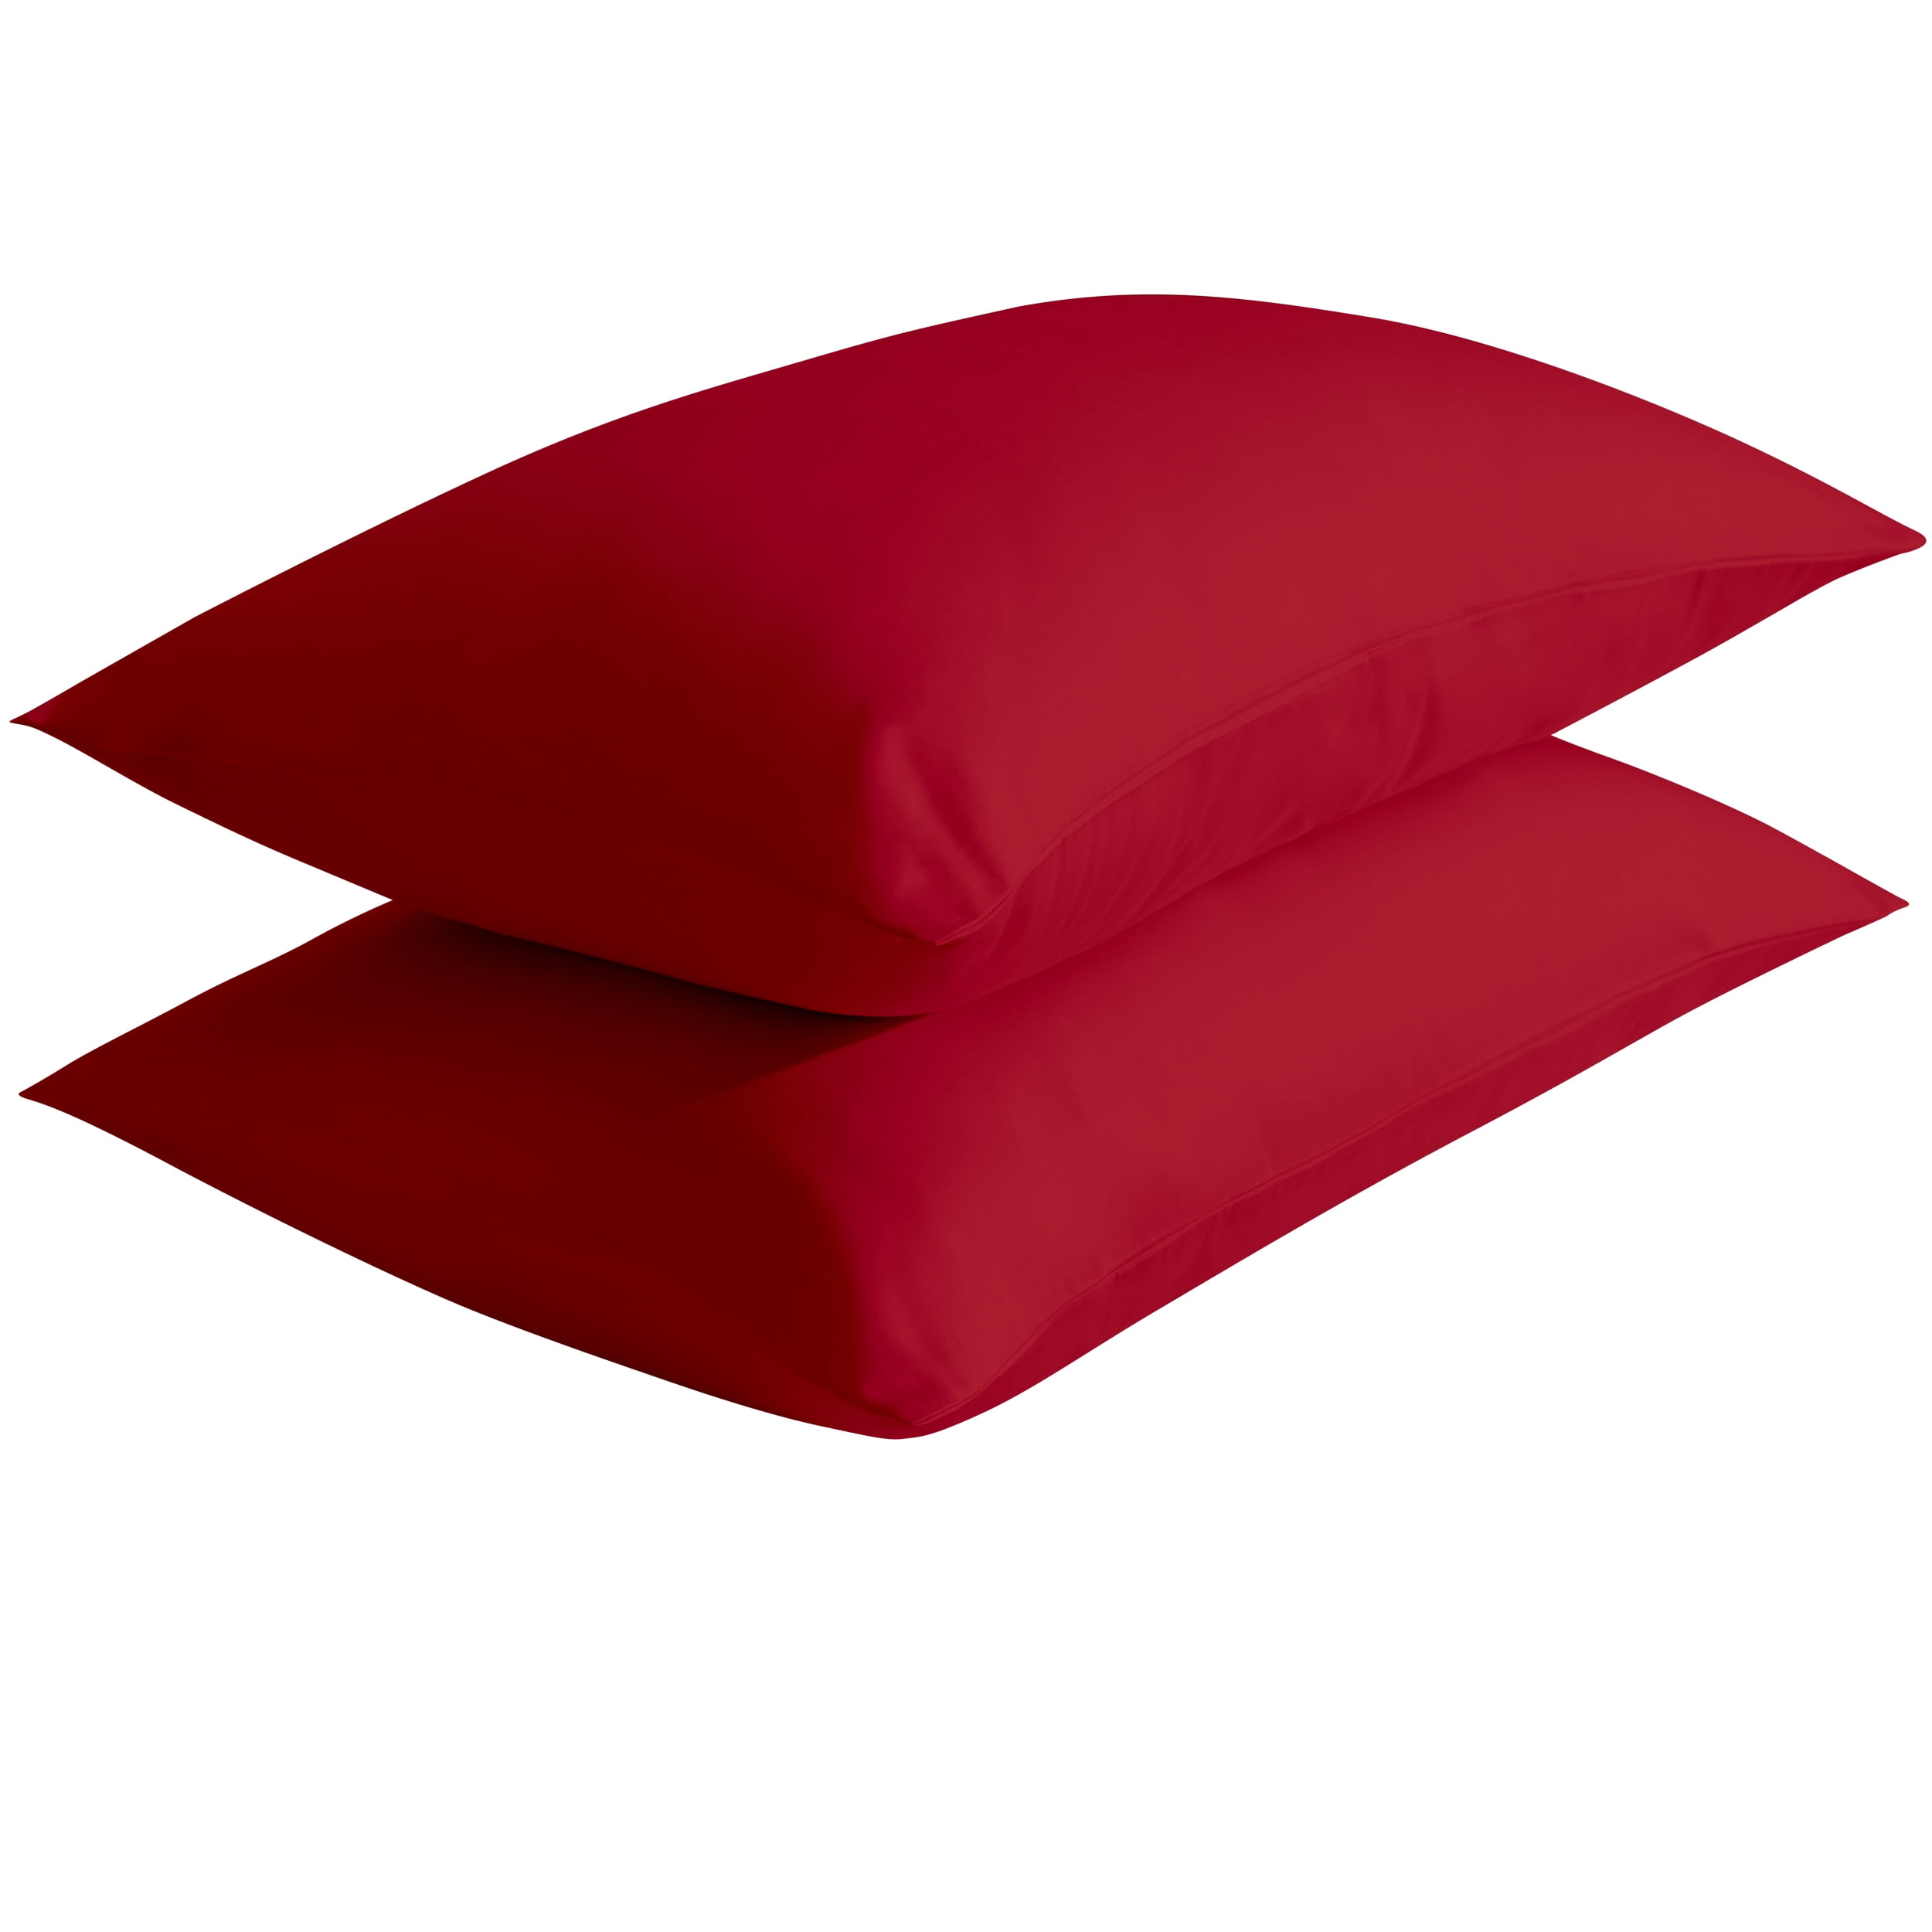 FREE SHIPPING Details about   Red Pillowcases 2 Pack Standard/Queen 20x30 in 